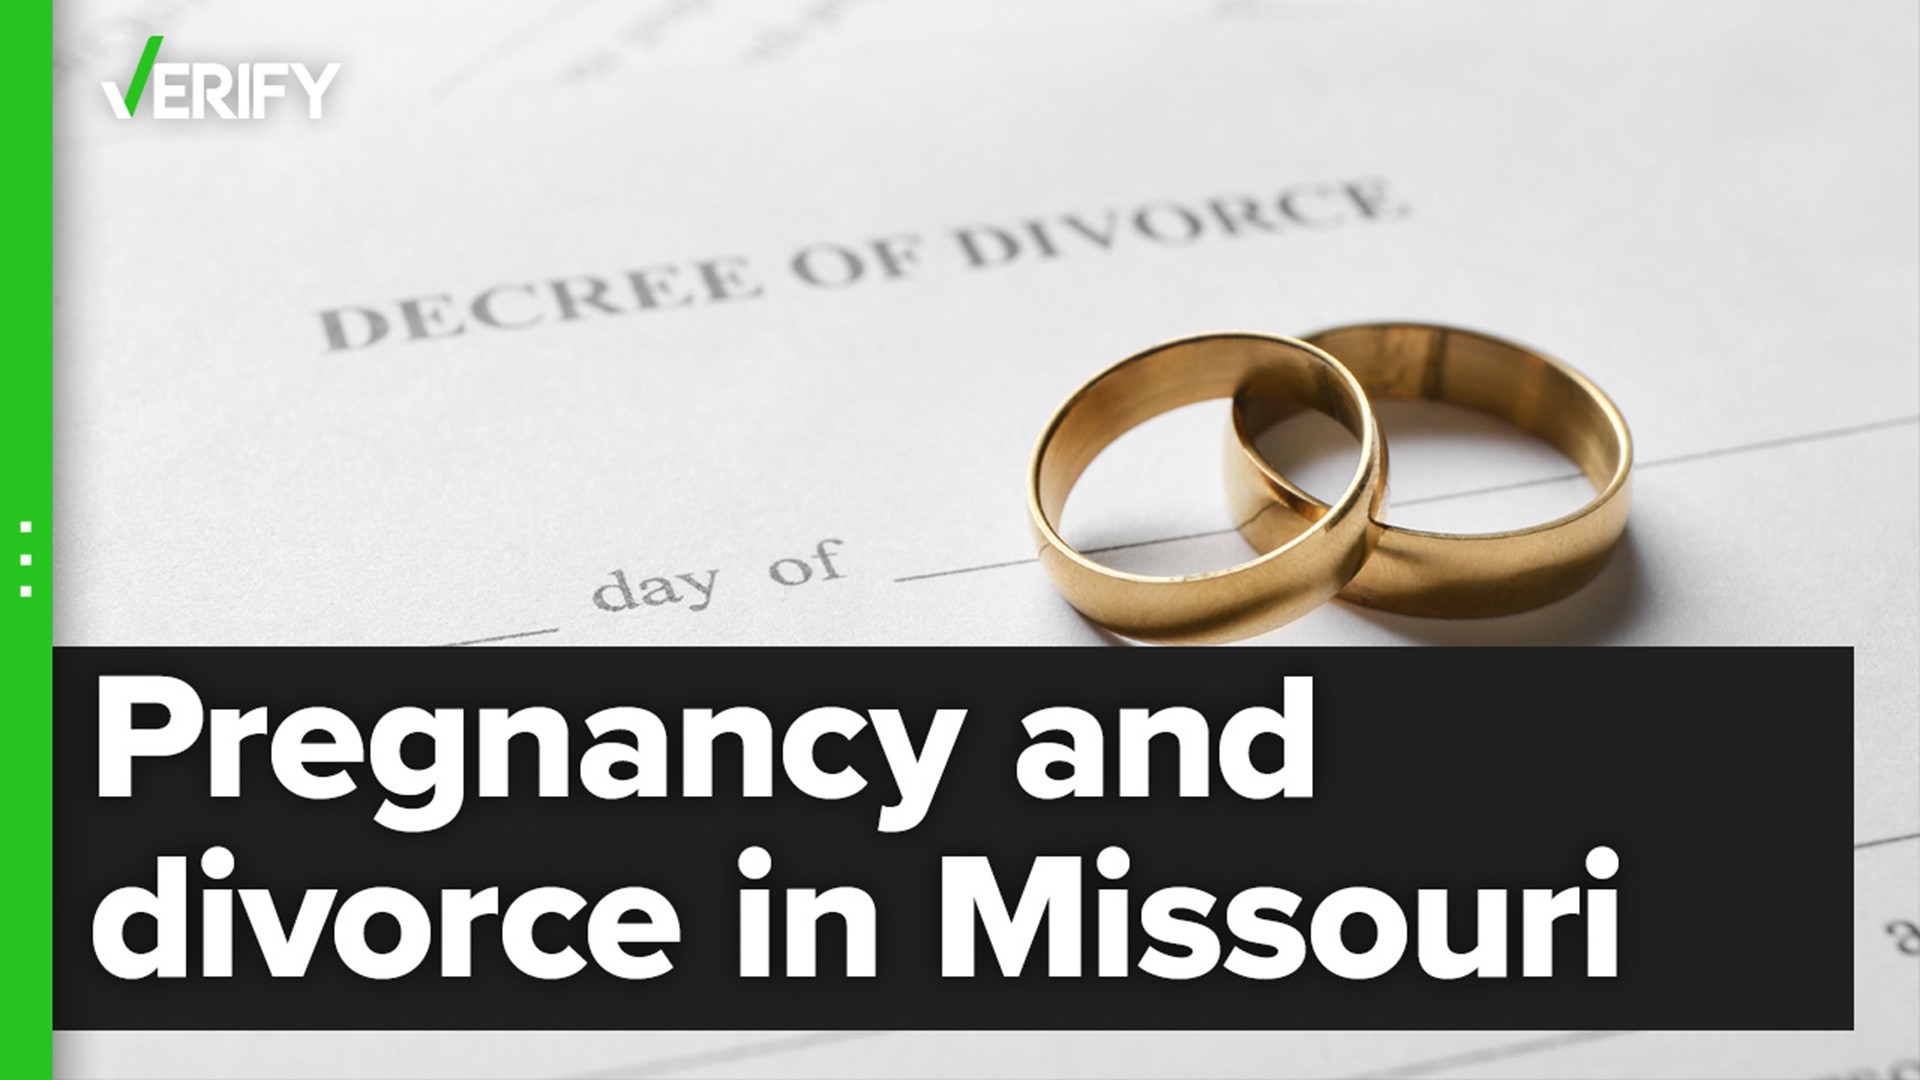 A divorce cannot be legally finalized in Missouri if the wife is pregnant, but spouses can still begin certain aspects of the divorce process.